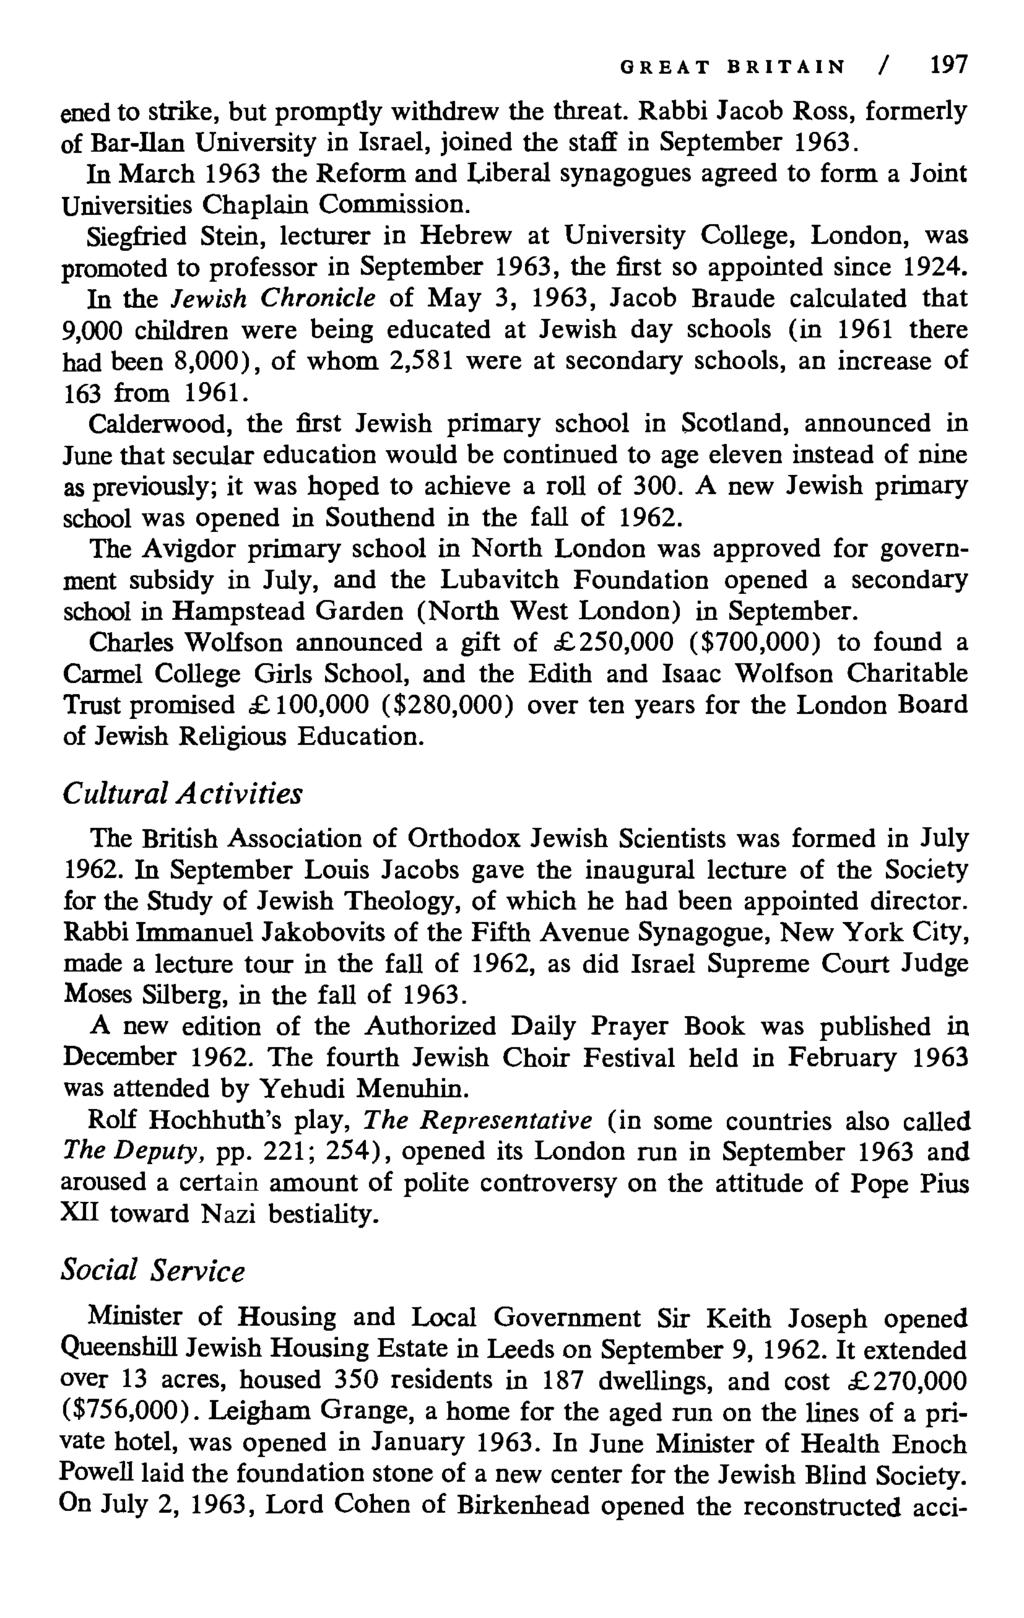 GREAT BRITAIN / 197 ened to strike, but promptly withdrew the threat. Rabbi Jacob Ross, formerly of Bar-flan University in Israel, joined the staff in September 1963.